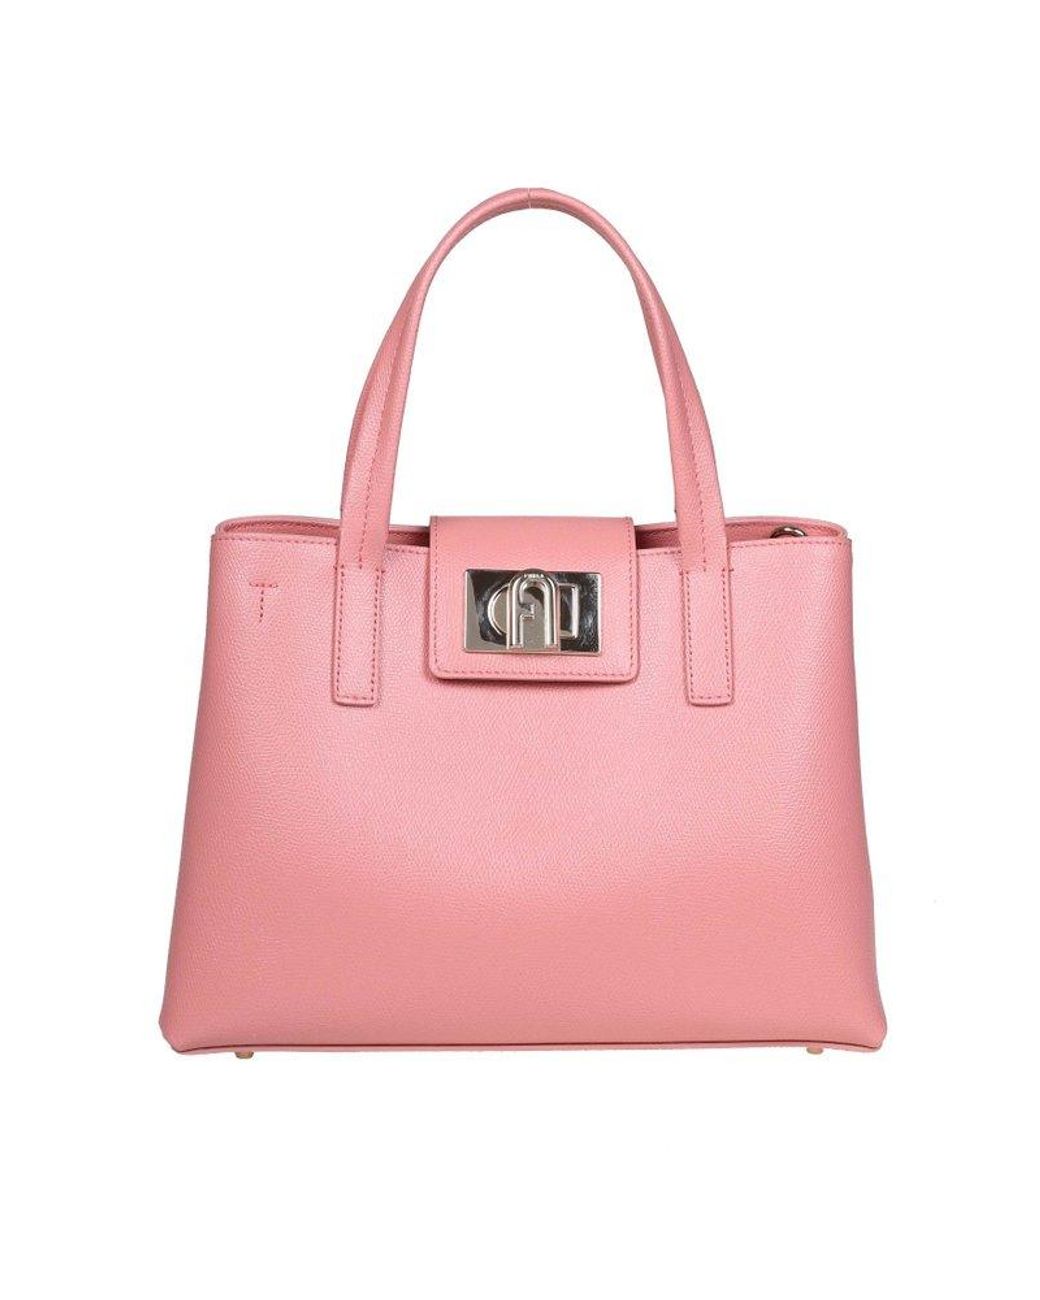 Furla 1927 M Tote Bag In Leather in Pink | Lyst